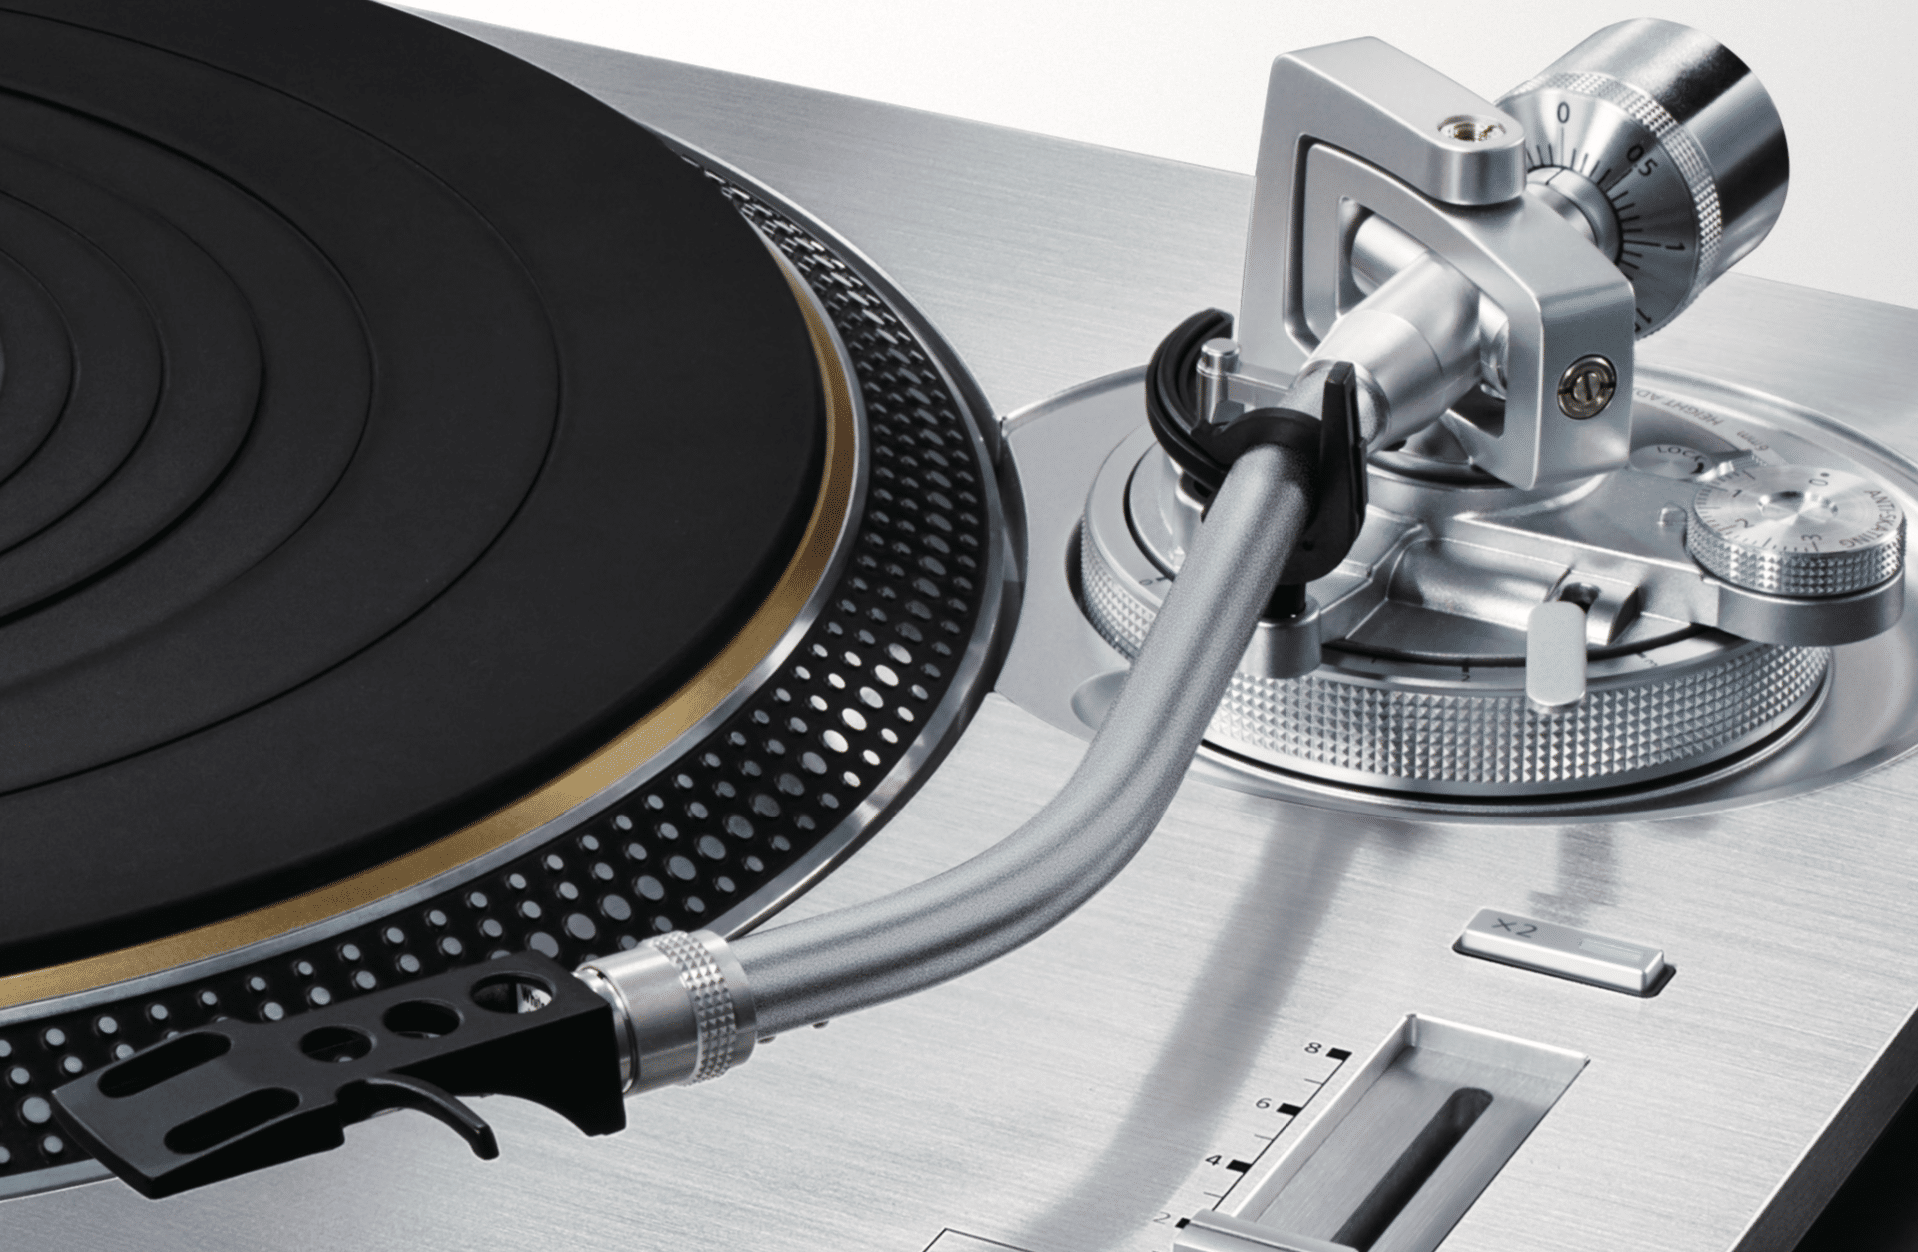 SL-1200G FROM TECHNICS: AN AUDIOPHILE REVIEW